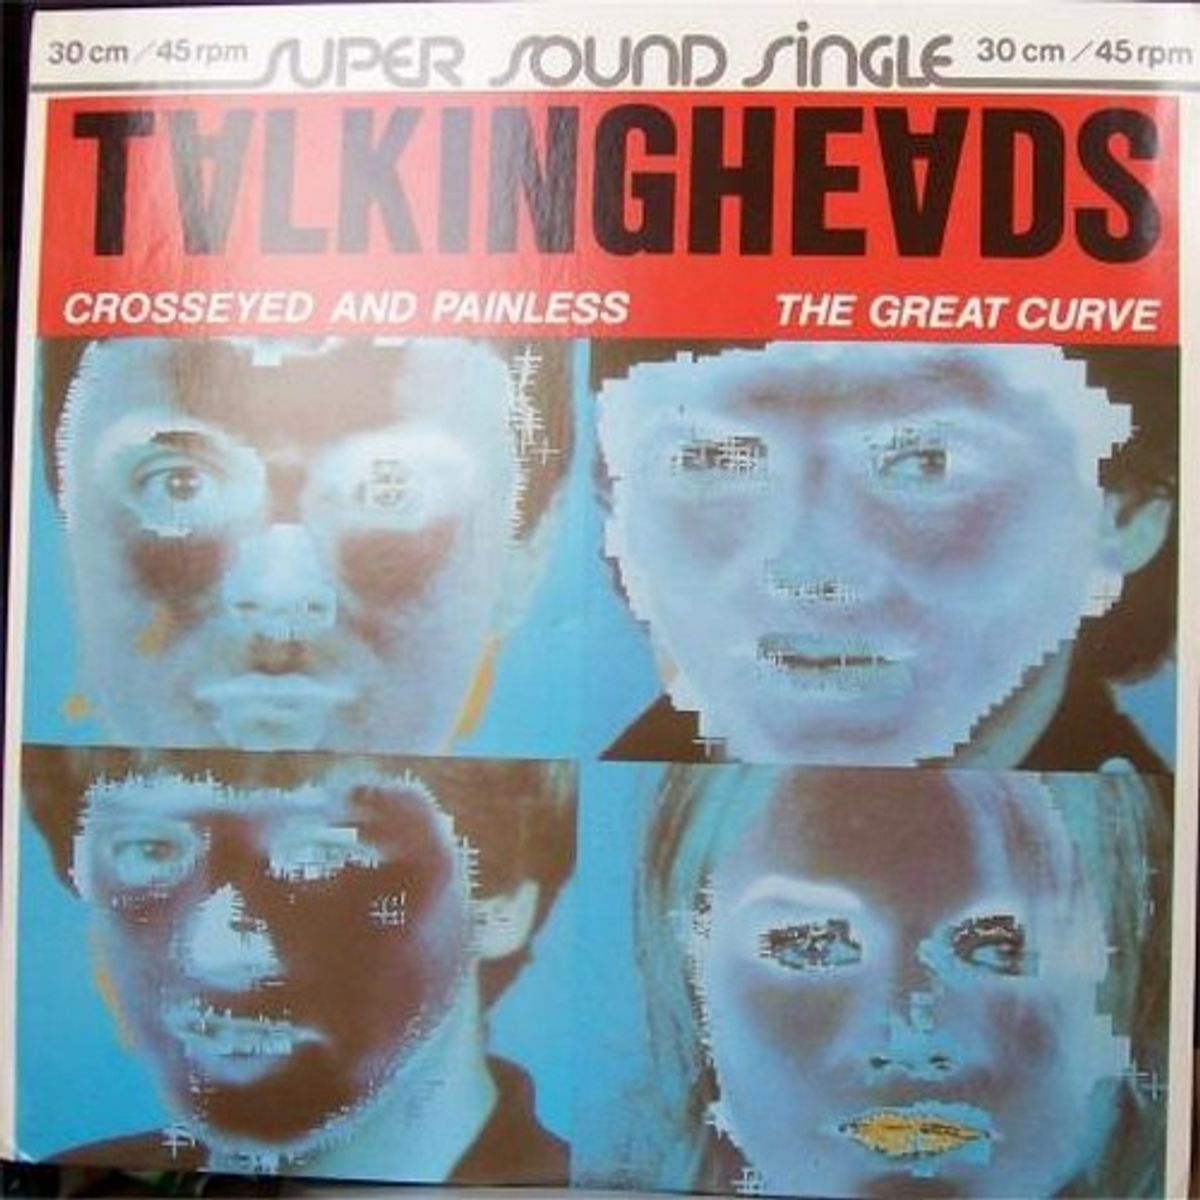 #AdrianBelew - Talking Heads - The Great Curve (1980)